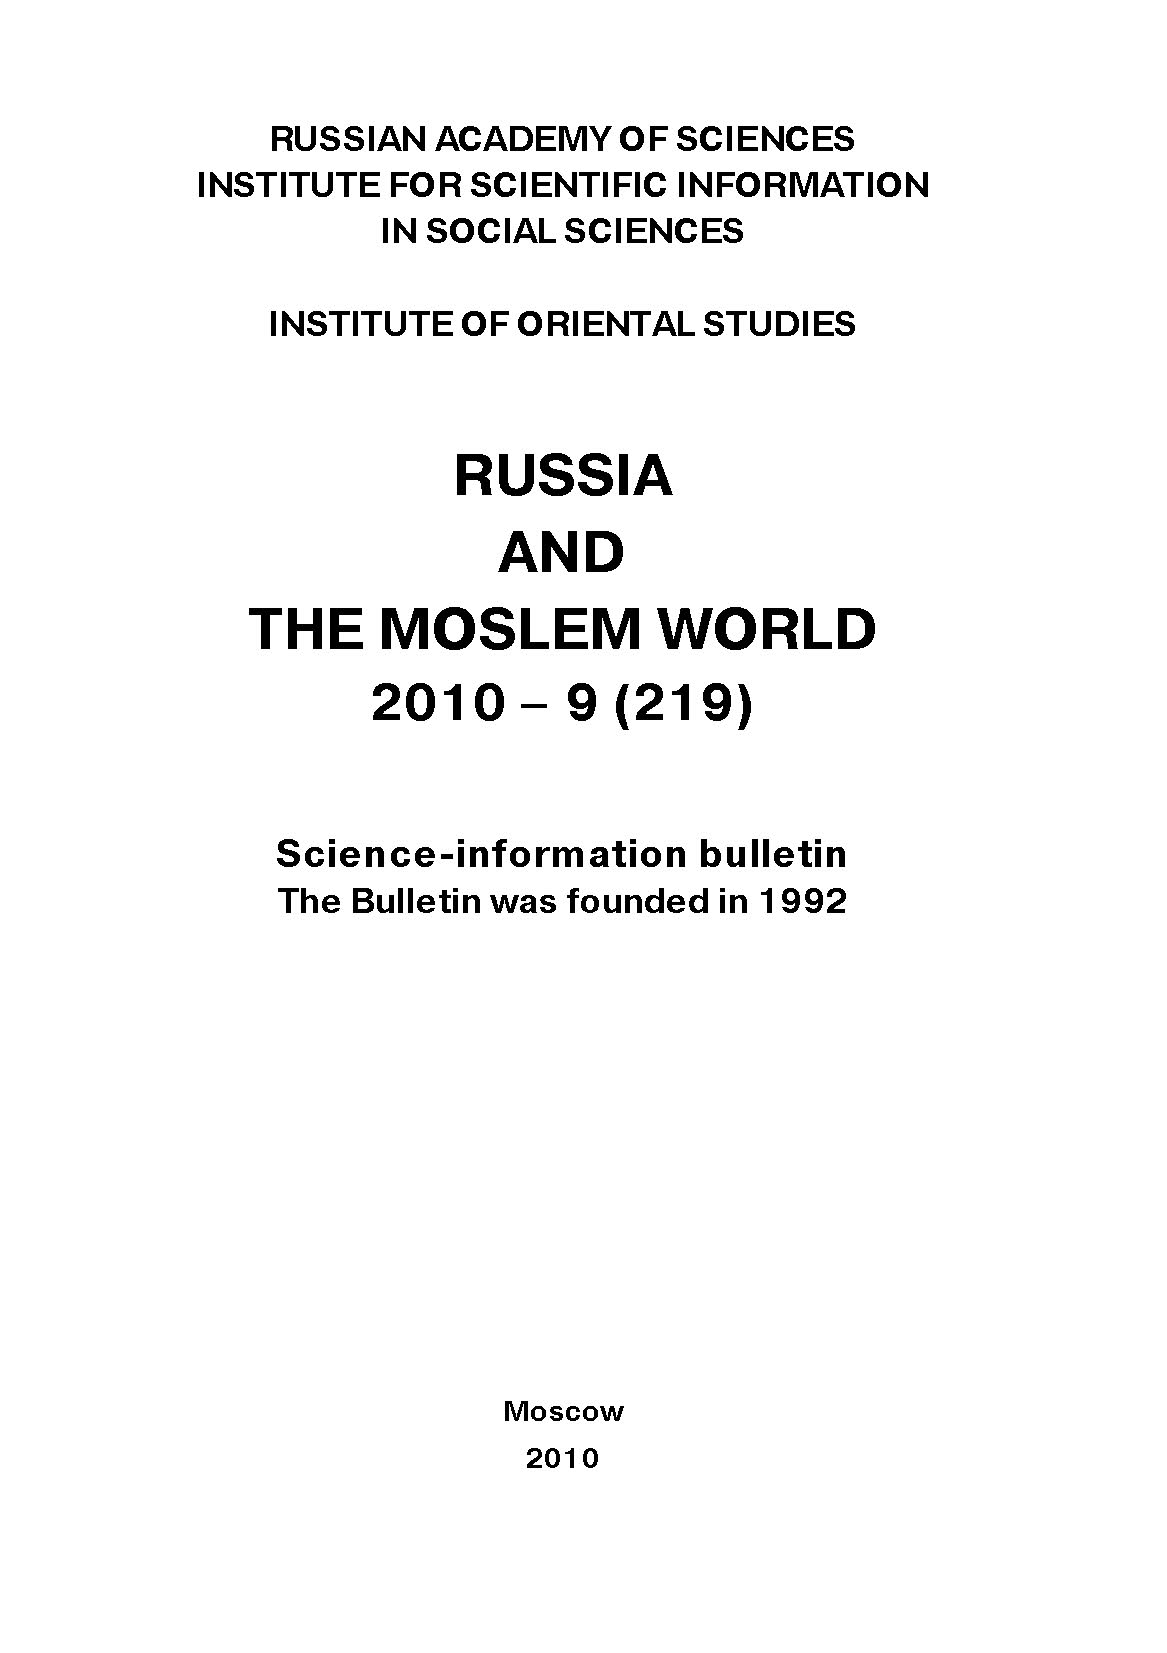 Russia and the Moslem World№ 09 / 2010